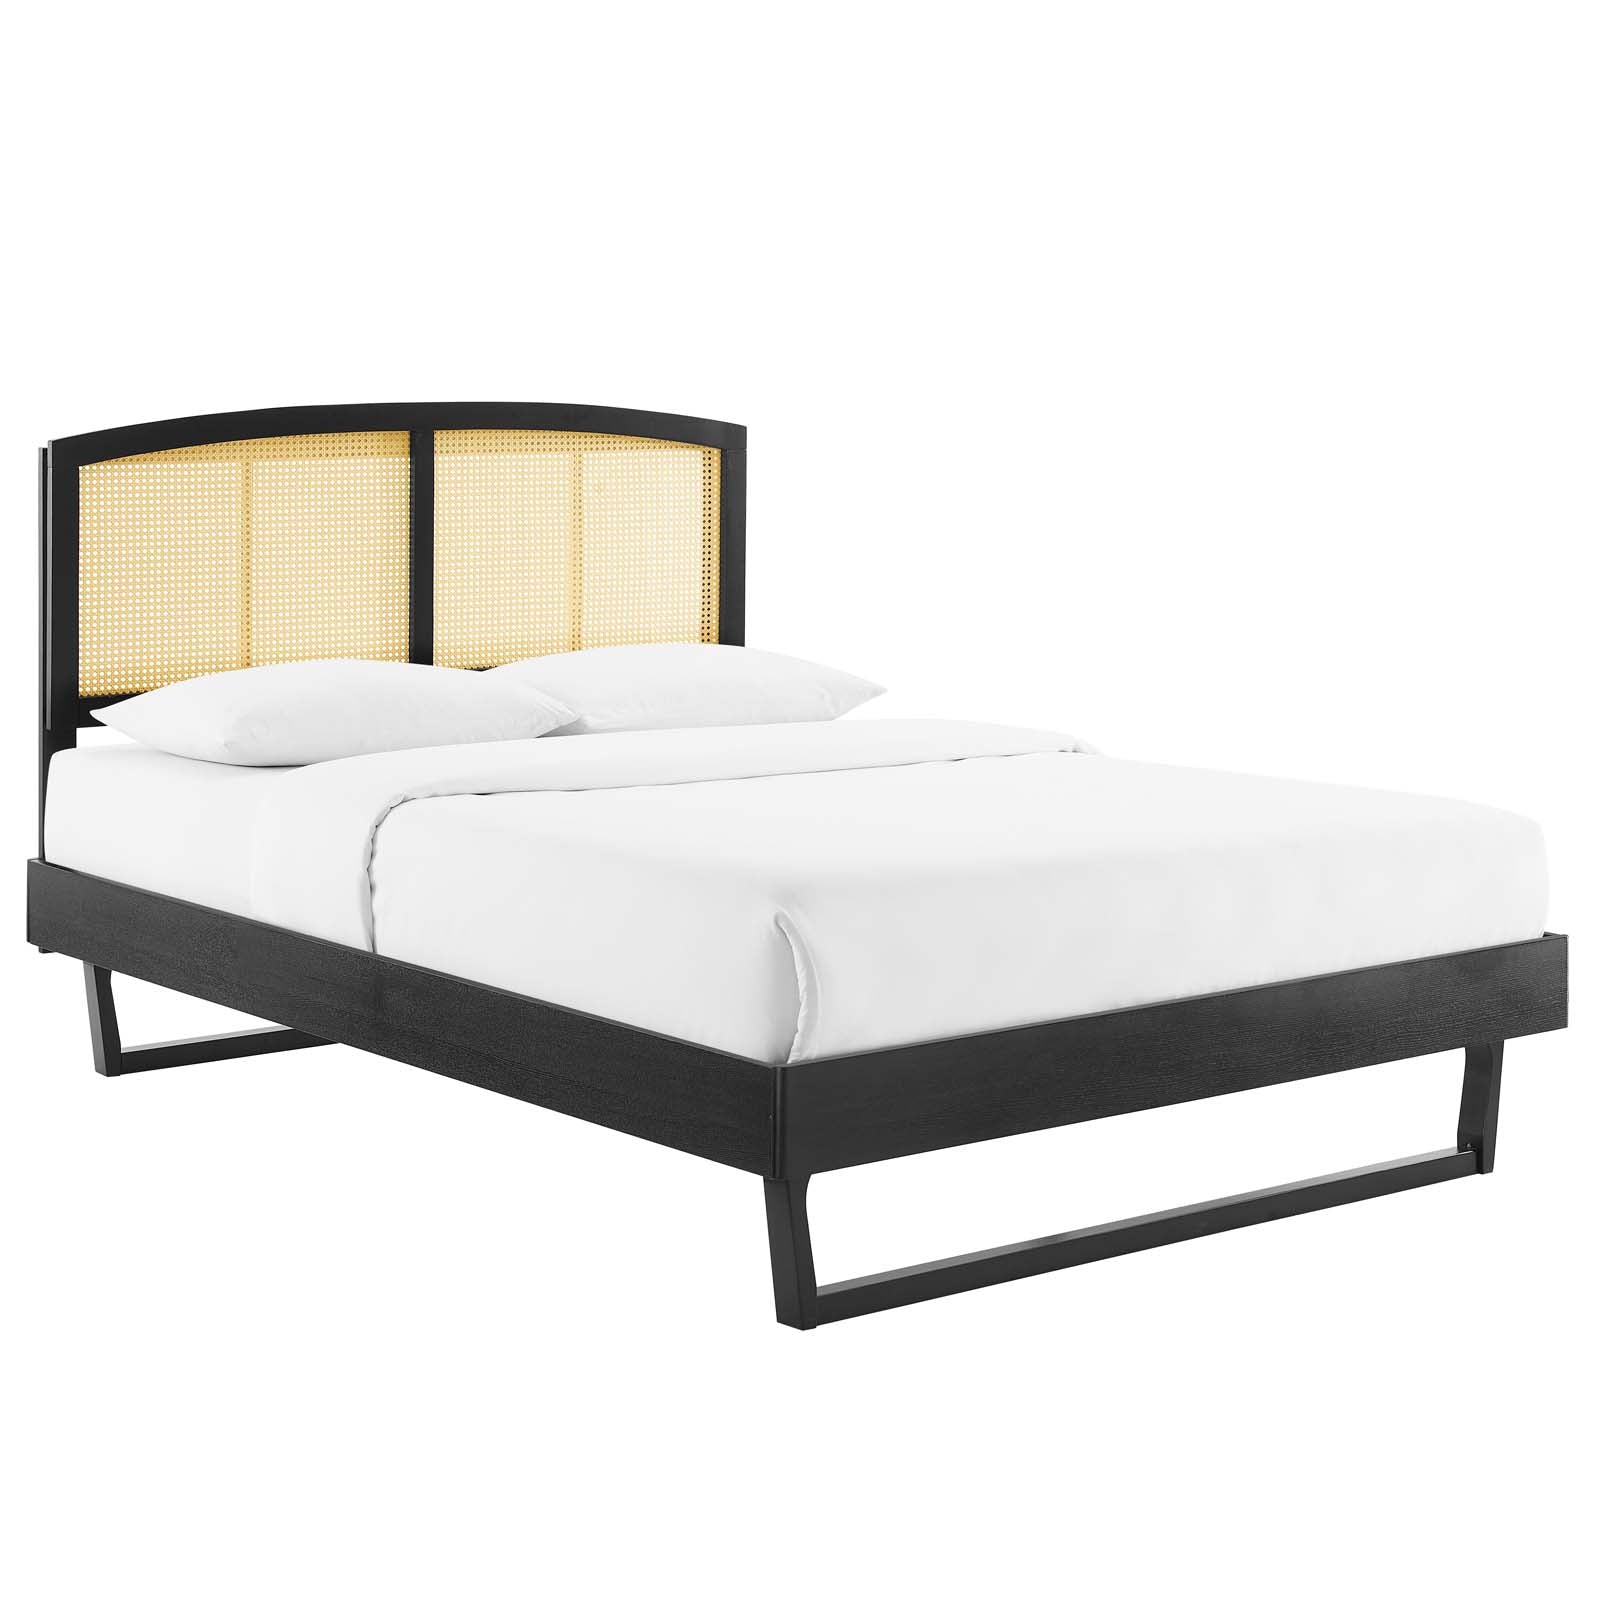 Modway Beds - Sierra-Cane-and-Wood-Queen-Platform-Bed-With-Angular-Legs-Black